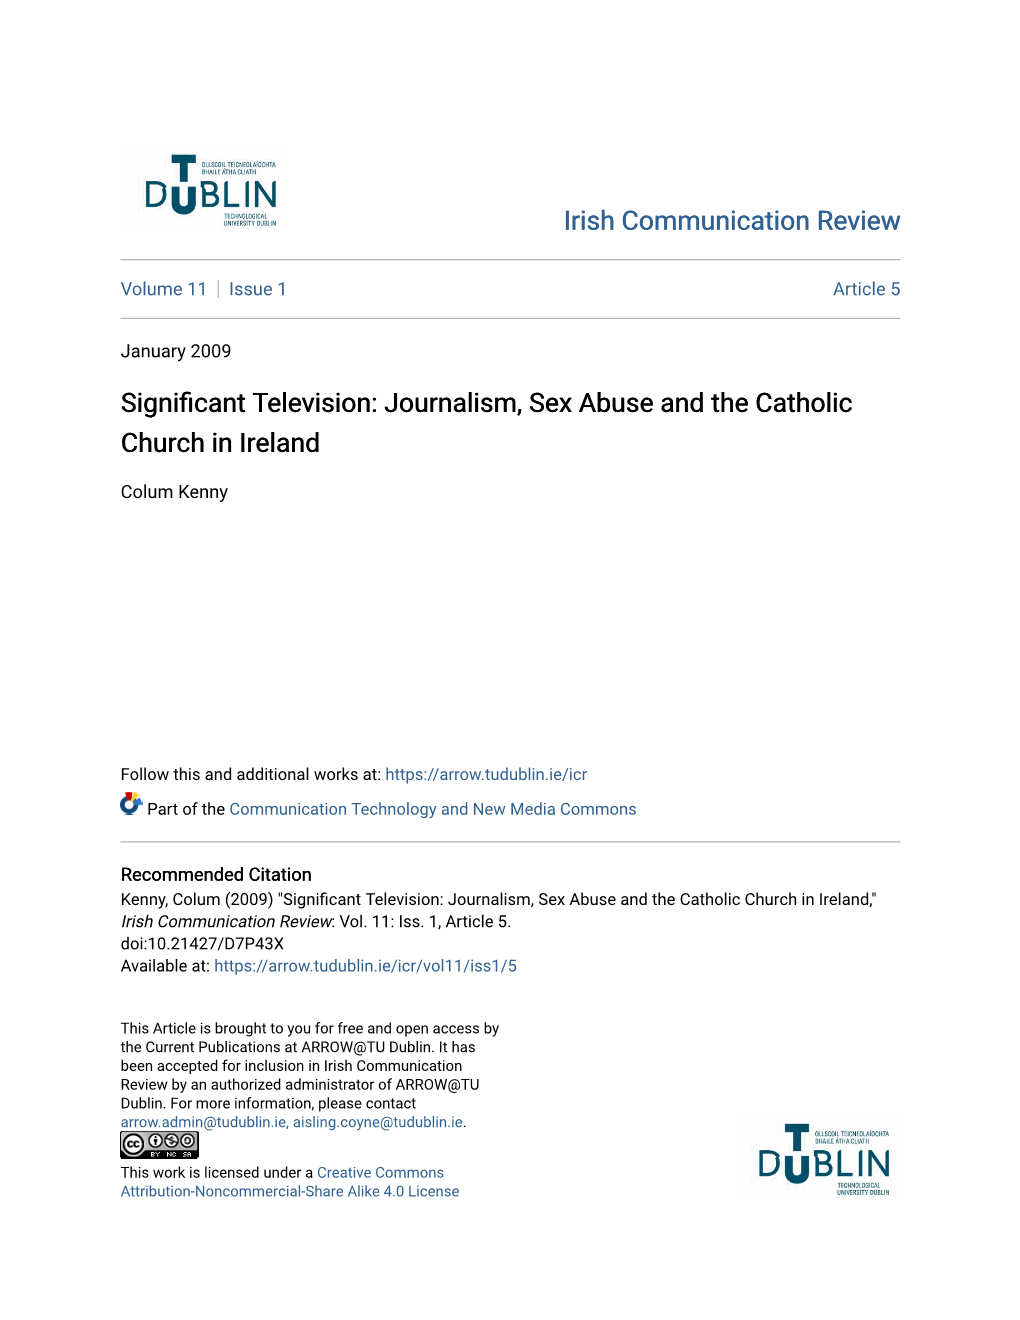 Significant Television: Journalism, Sex Abuse and the Catholic Church In